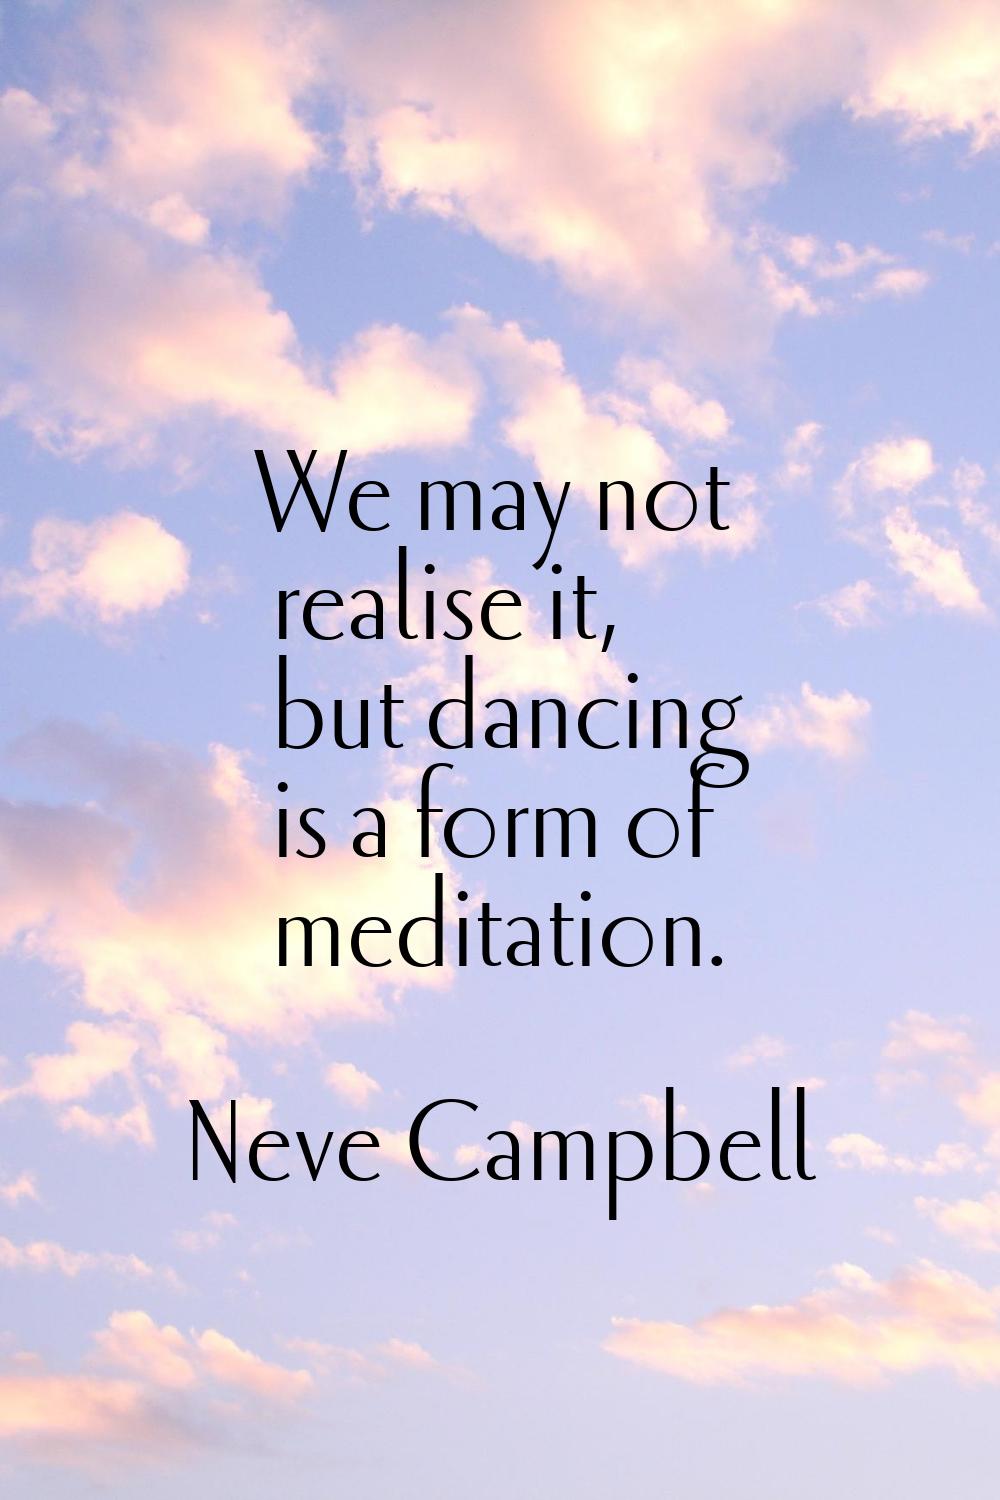 We may not realise it, but dancing is a form of meditation.